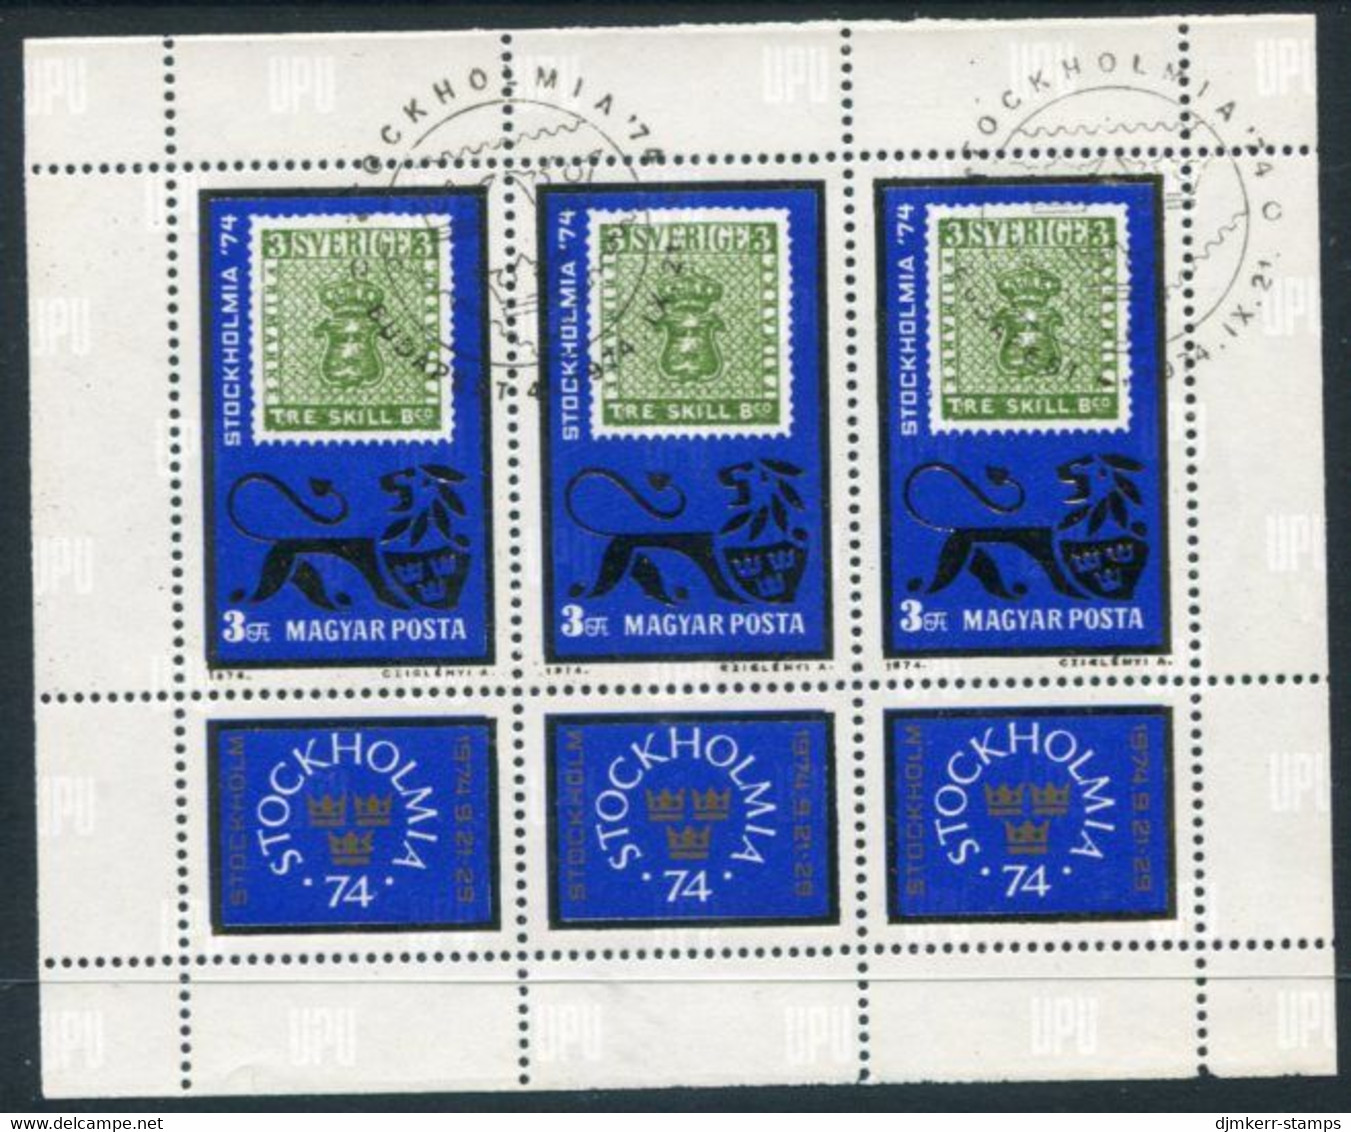 HUNGARY 1974 STOCKHOLMIA Stamp Exhibition Sheetlet Used.  Michel 2981 Kb - Blocs-feuillets